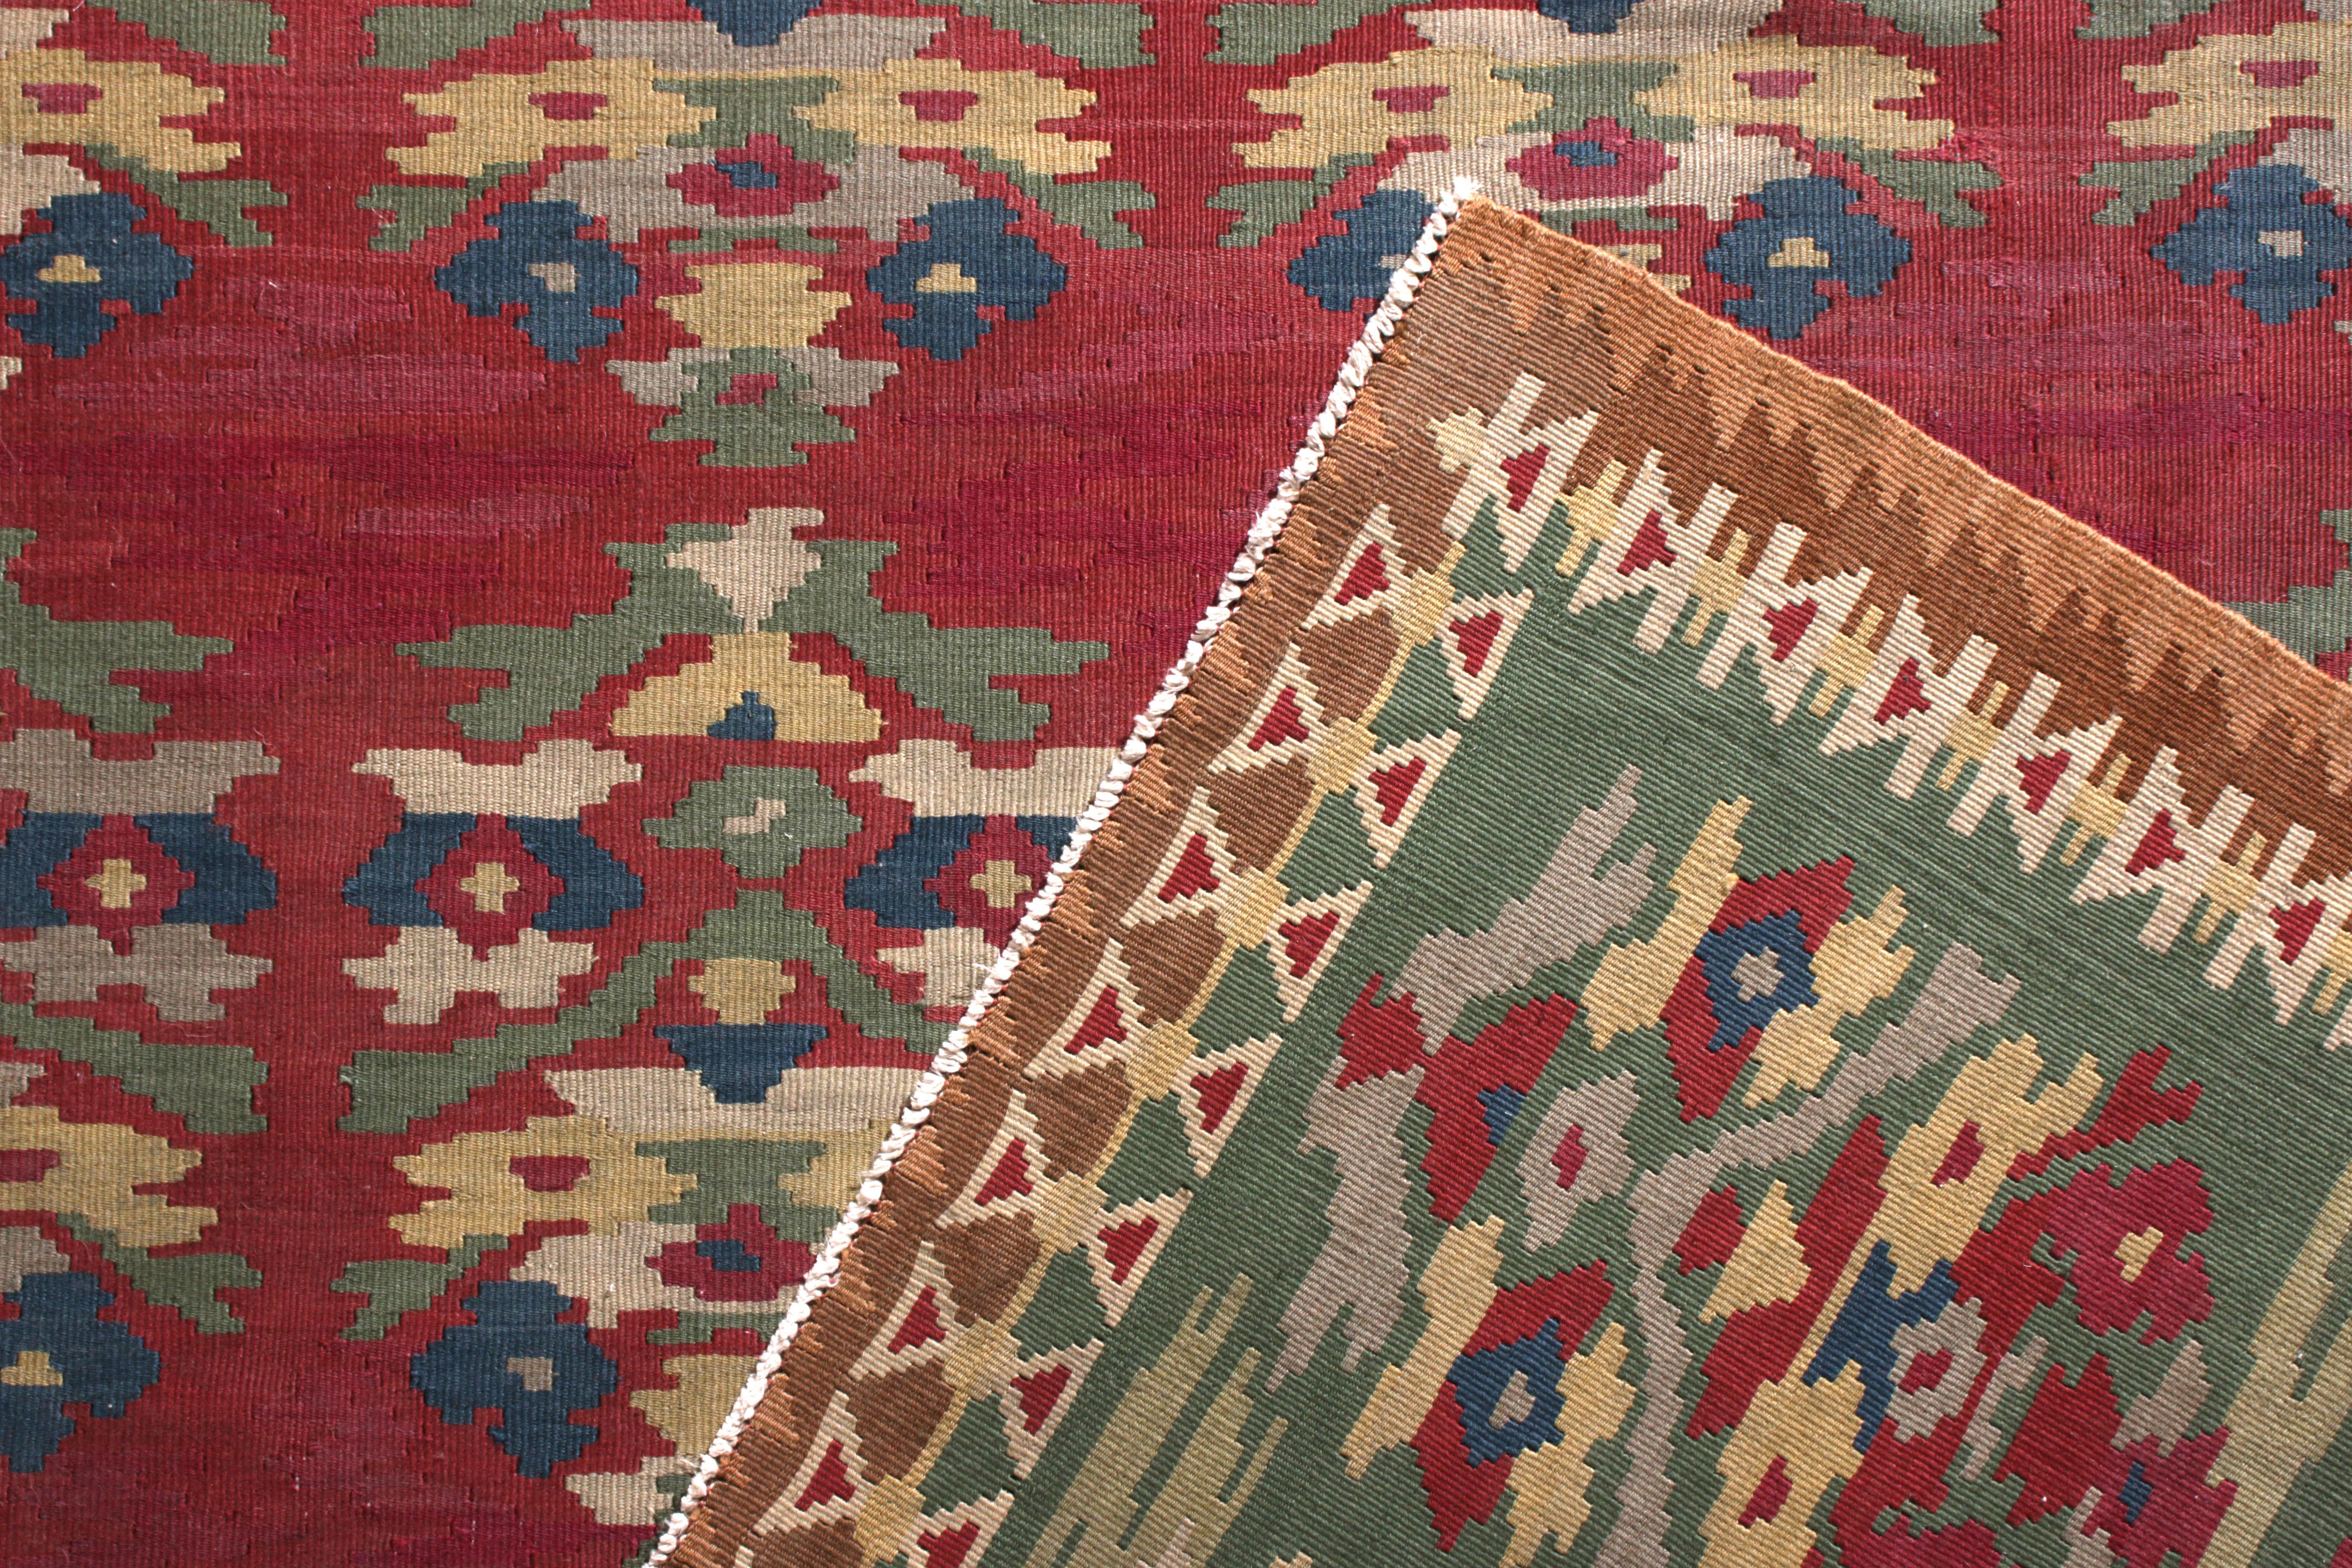 Rug & Kilim's Handwoven Vintage Midcentury Kilim Rug in Red All-Over Pattern In Good Condition For Sale In Long Island City, NY